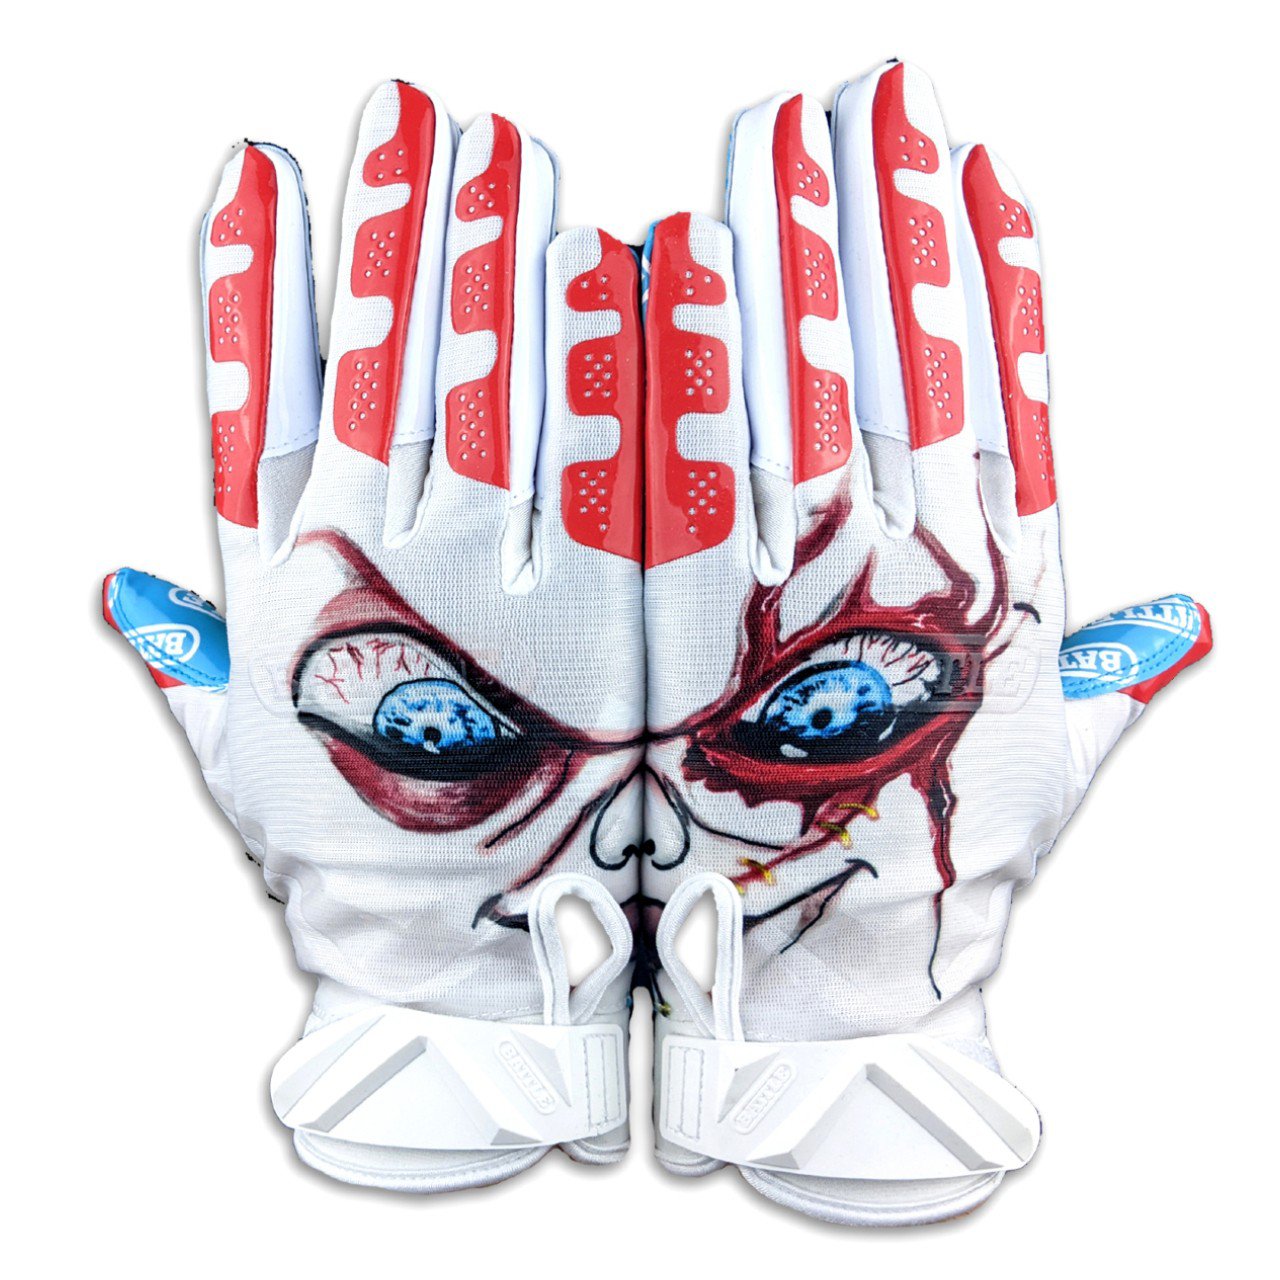 Battle Youth Lil Evil Football Gloves